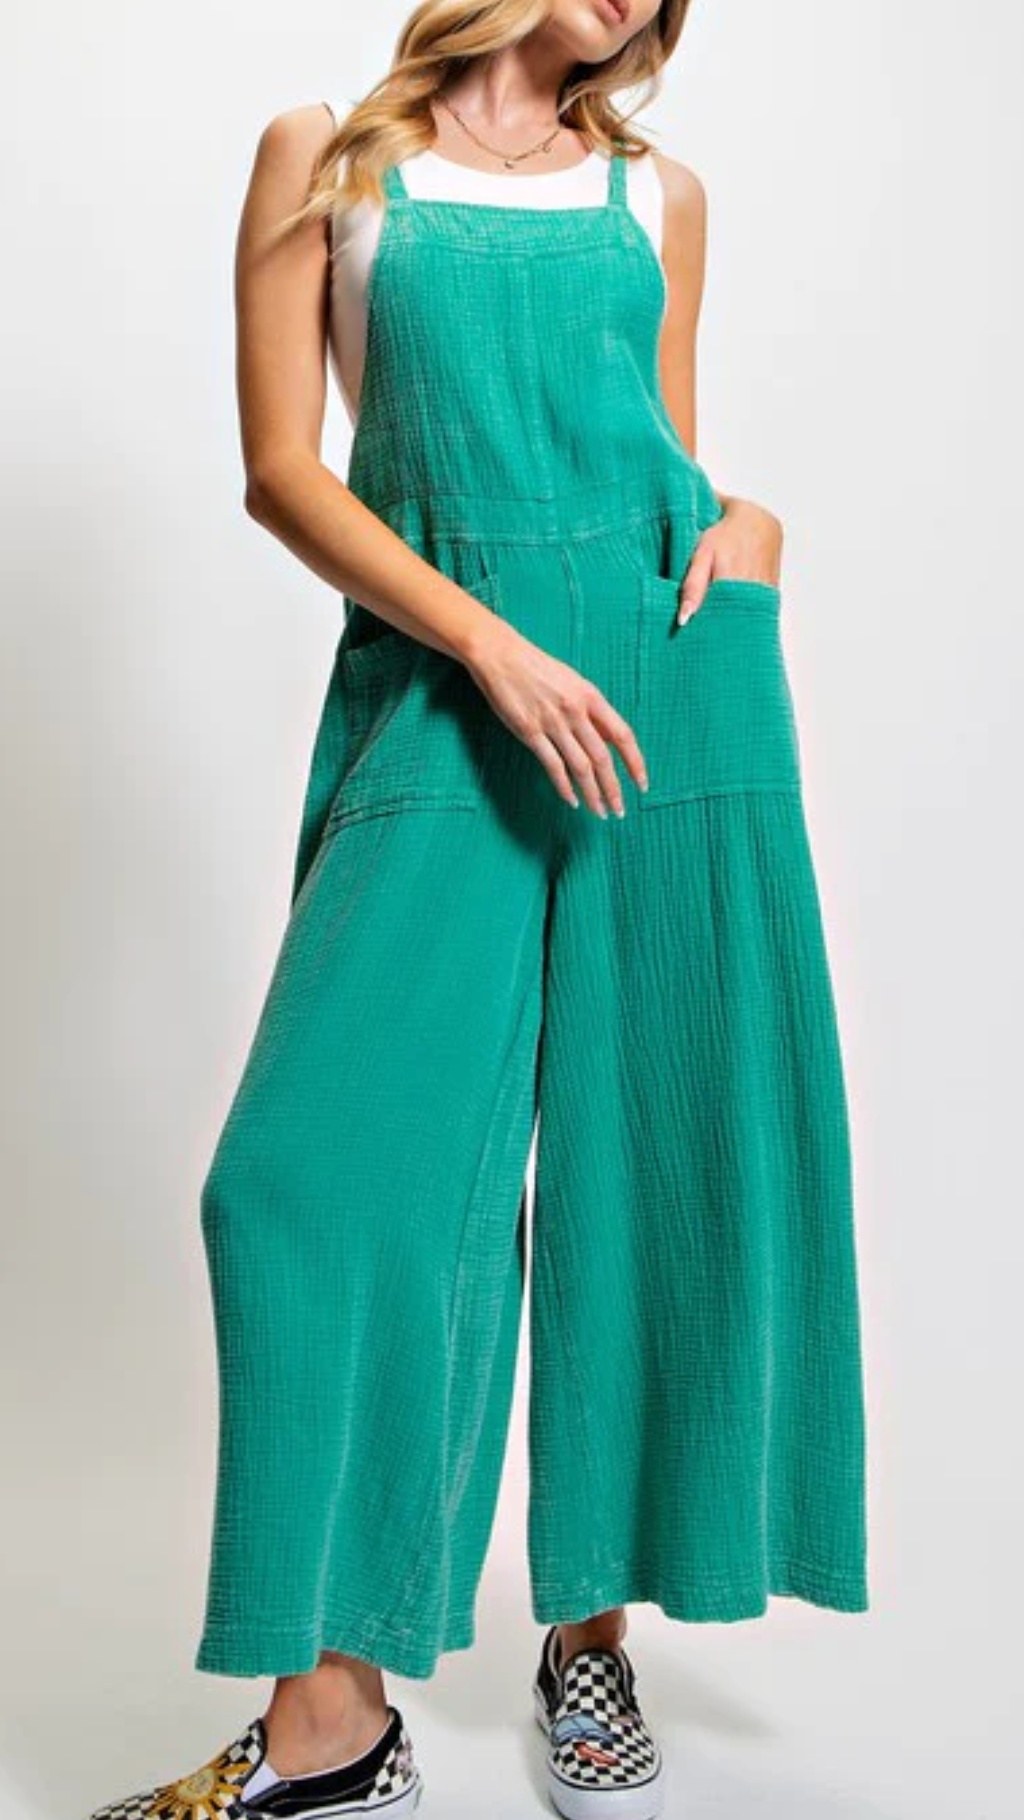 Wshed Cotton Overalls (Buy 2 Free Shipping)